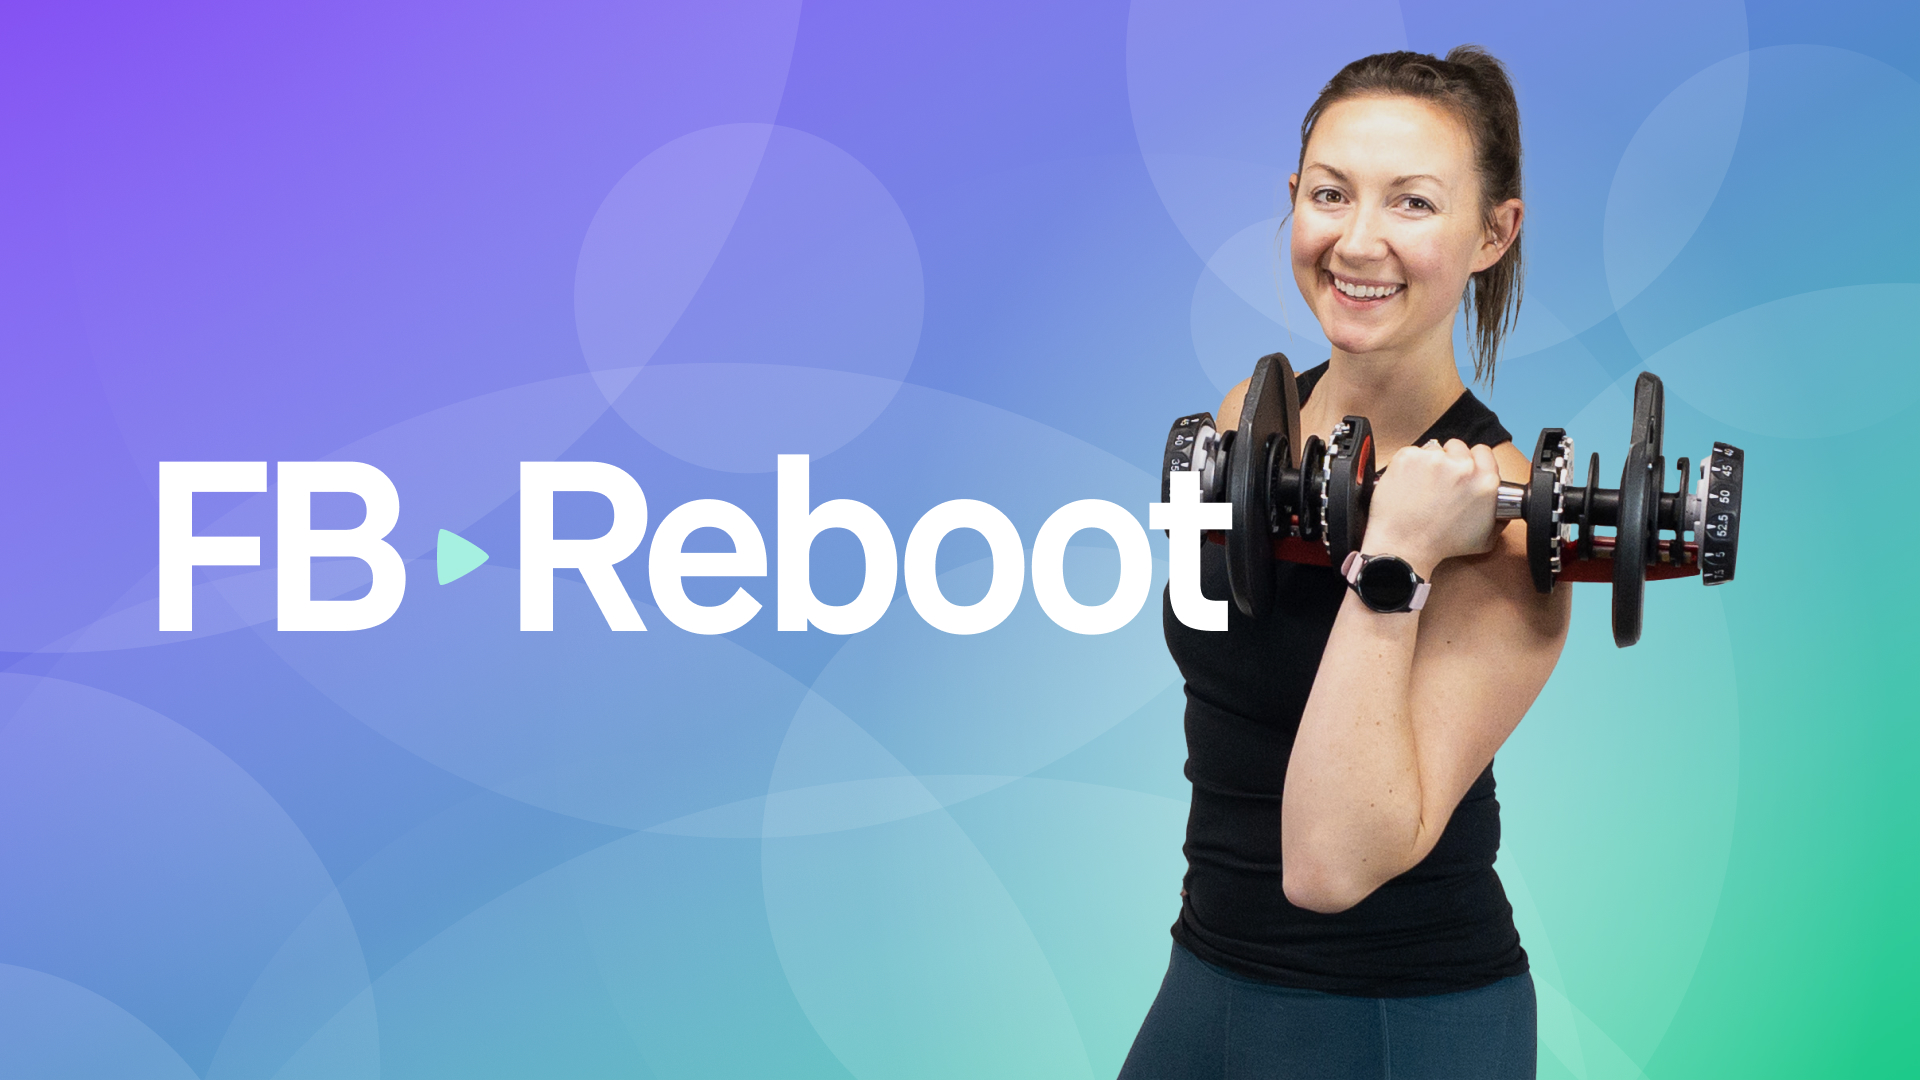 FB Reboot: 8-Week Program Jumpstart Your Fitness Routine Workouts to Strength, Confidence, and Consistency | Fitness Blender